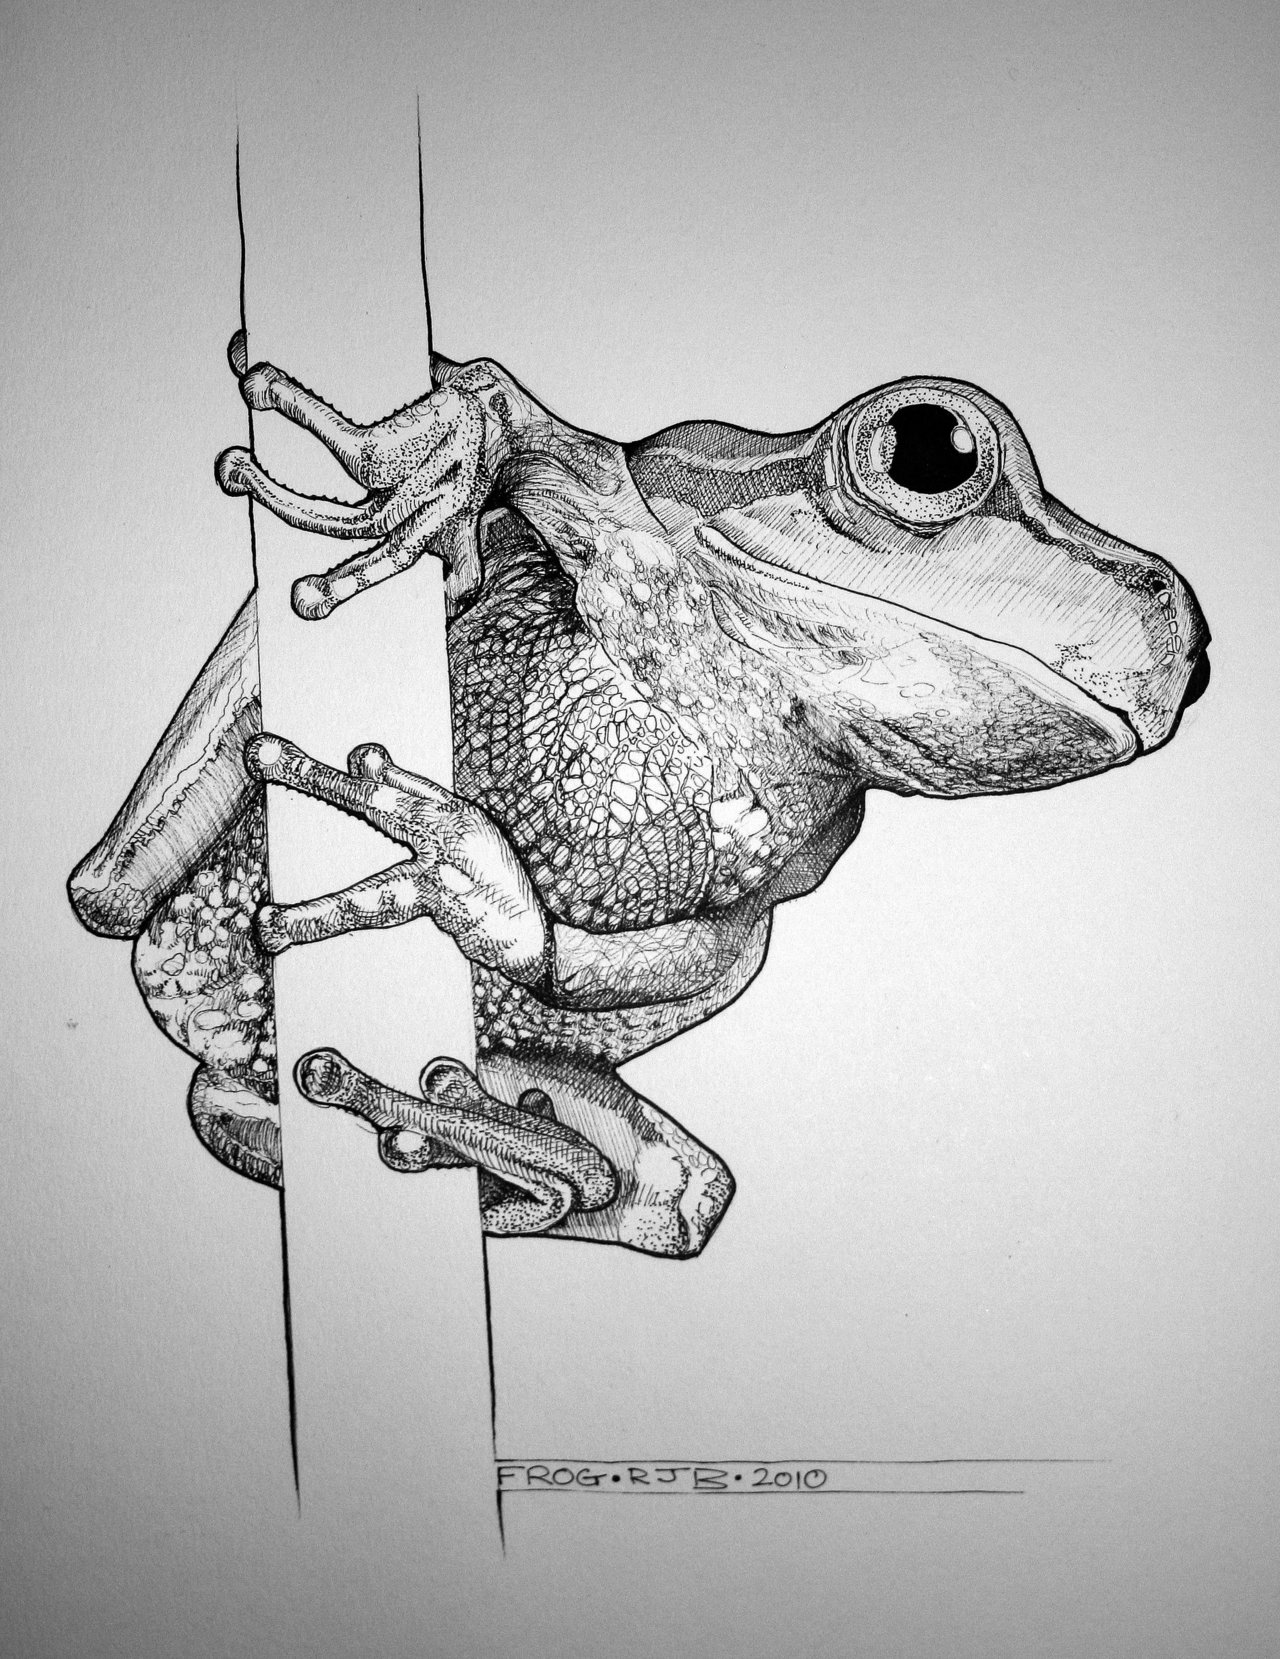 Frog pen and ink by rojobe on DeviantArt